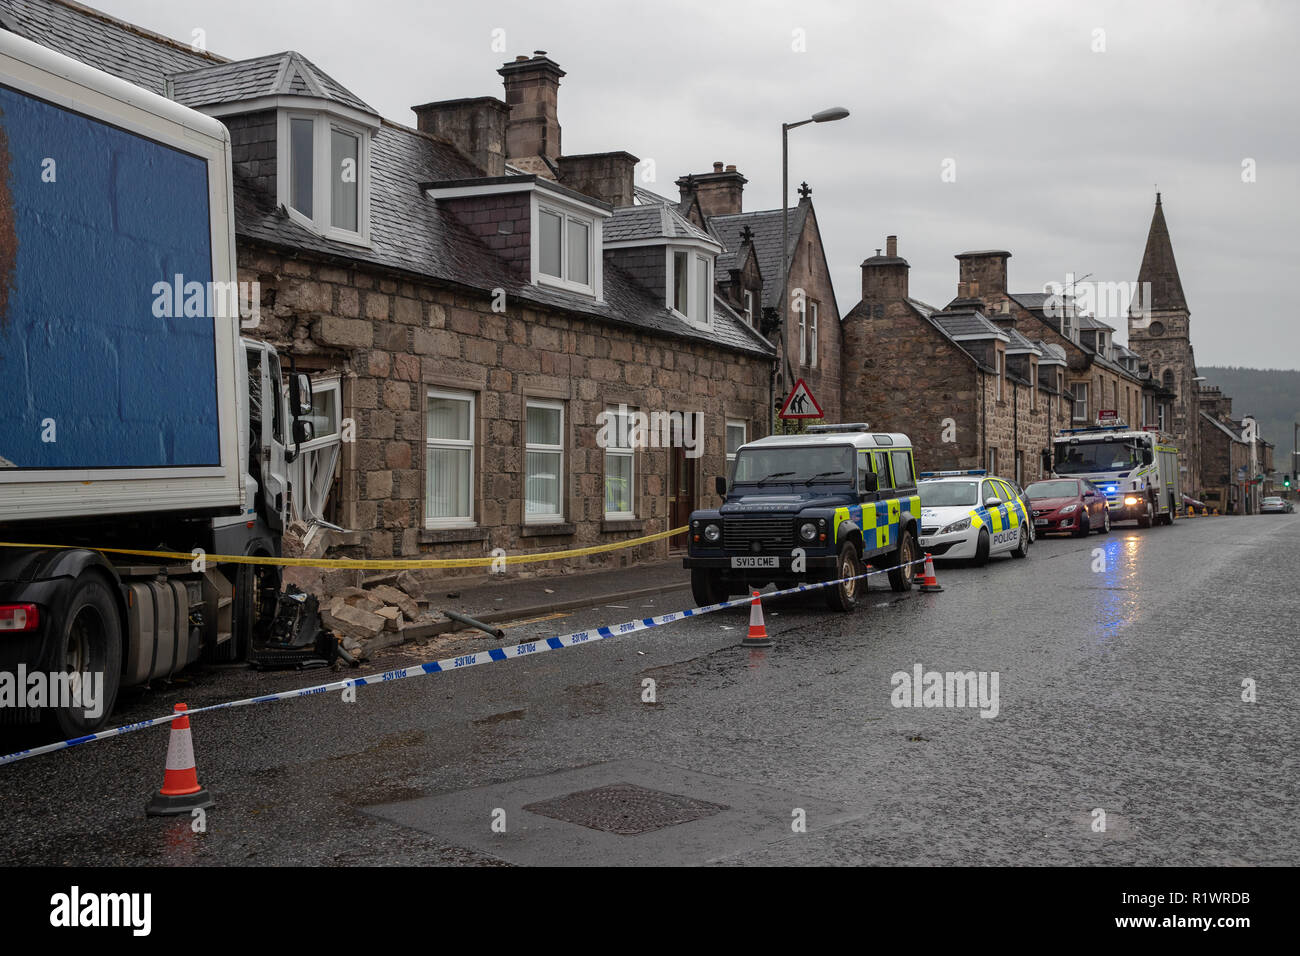 ROTHES, MORAY, SCOTLAND 13 MAY 2018:- This is the scene of the accident where a Tesco Delivery truck collided into a house on the main street. Stock Photo